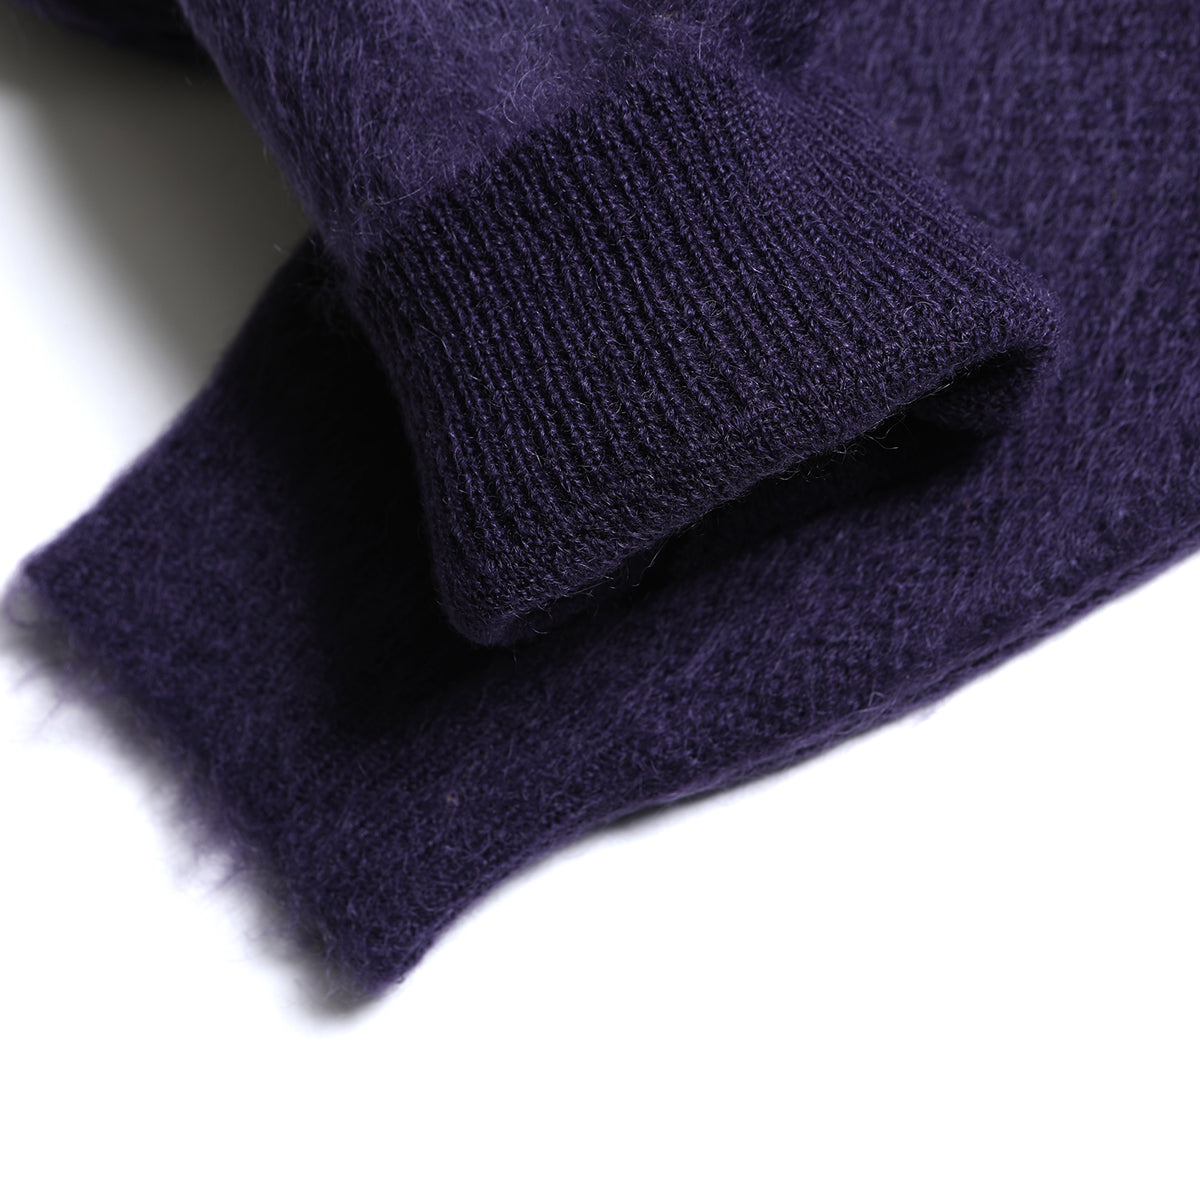 Mohair Knit Crew Neck Sweater / TR23AW-208